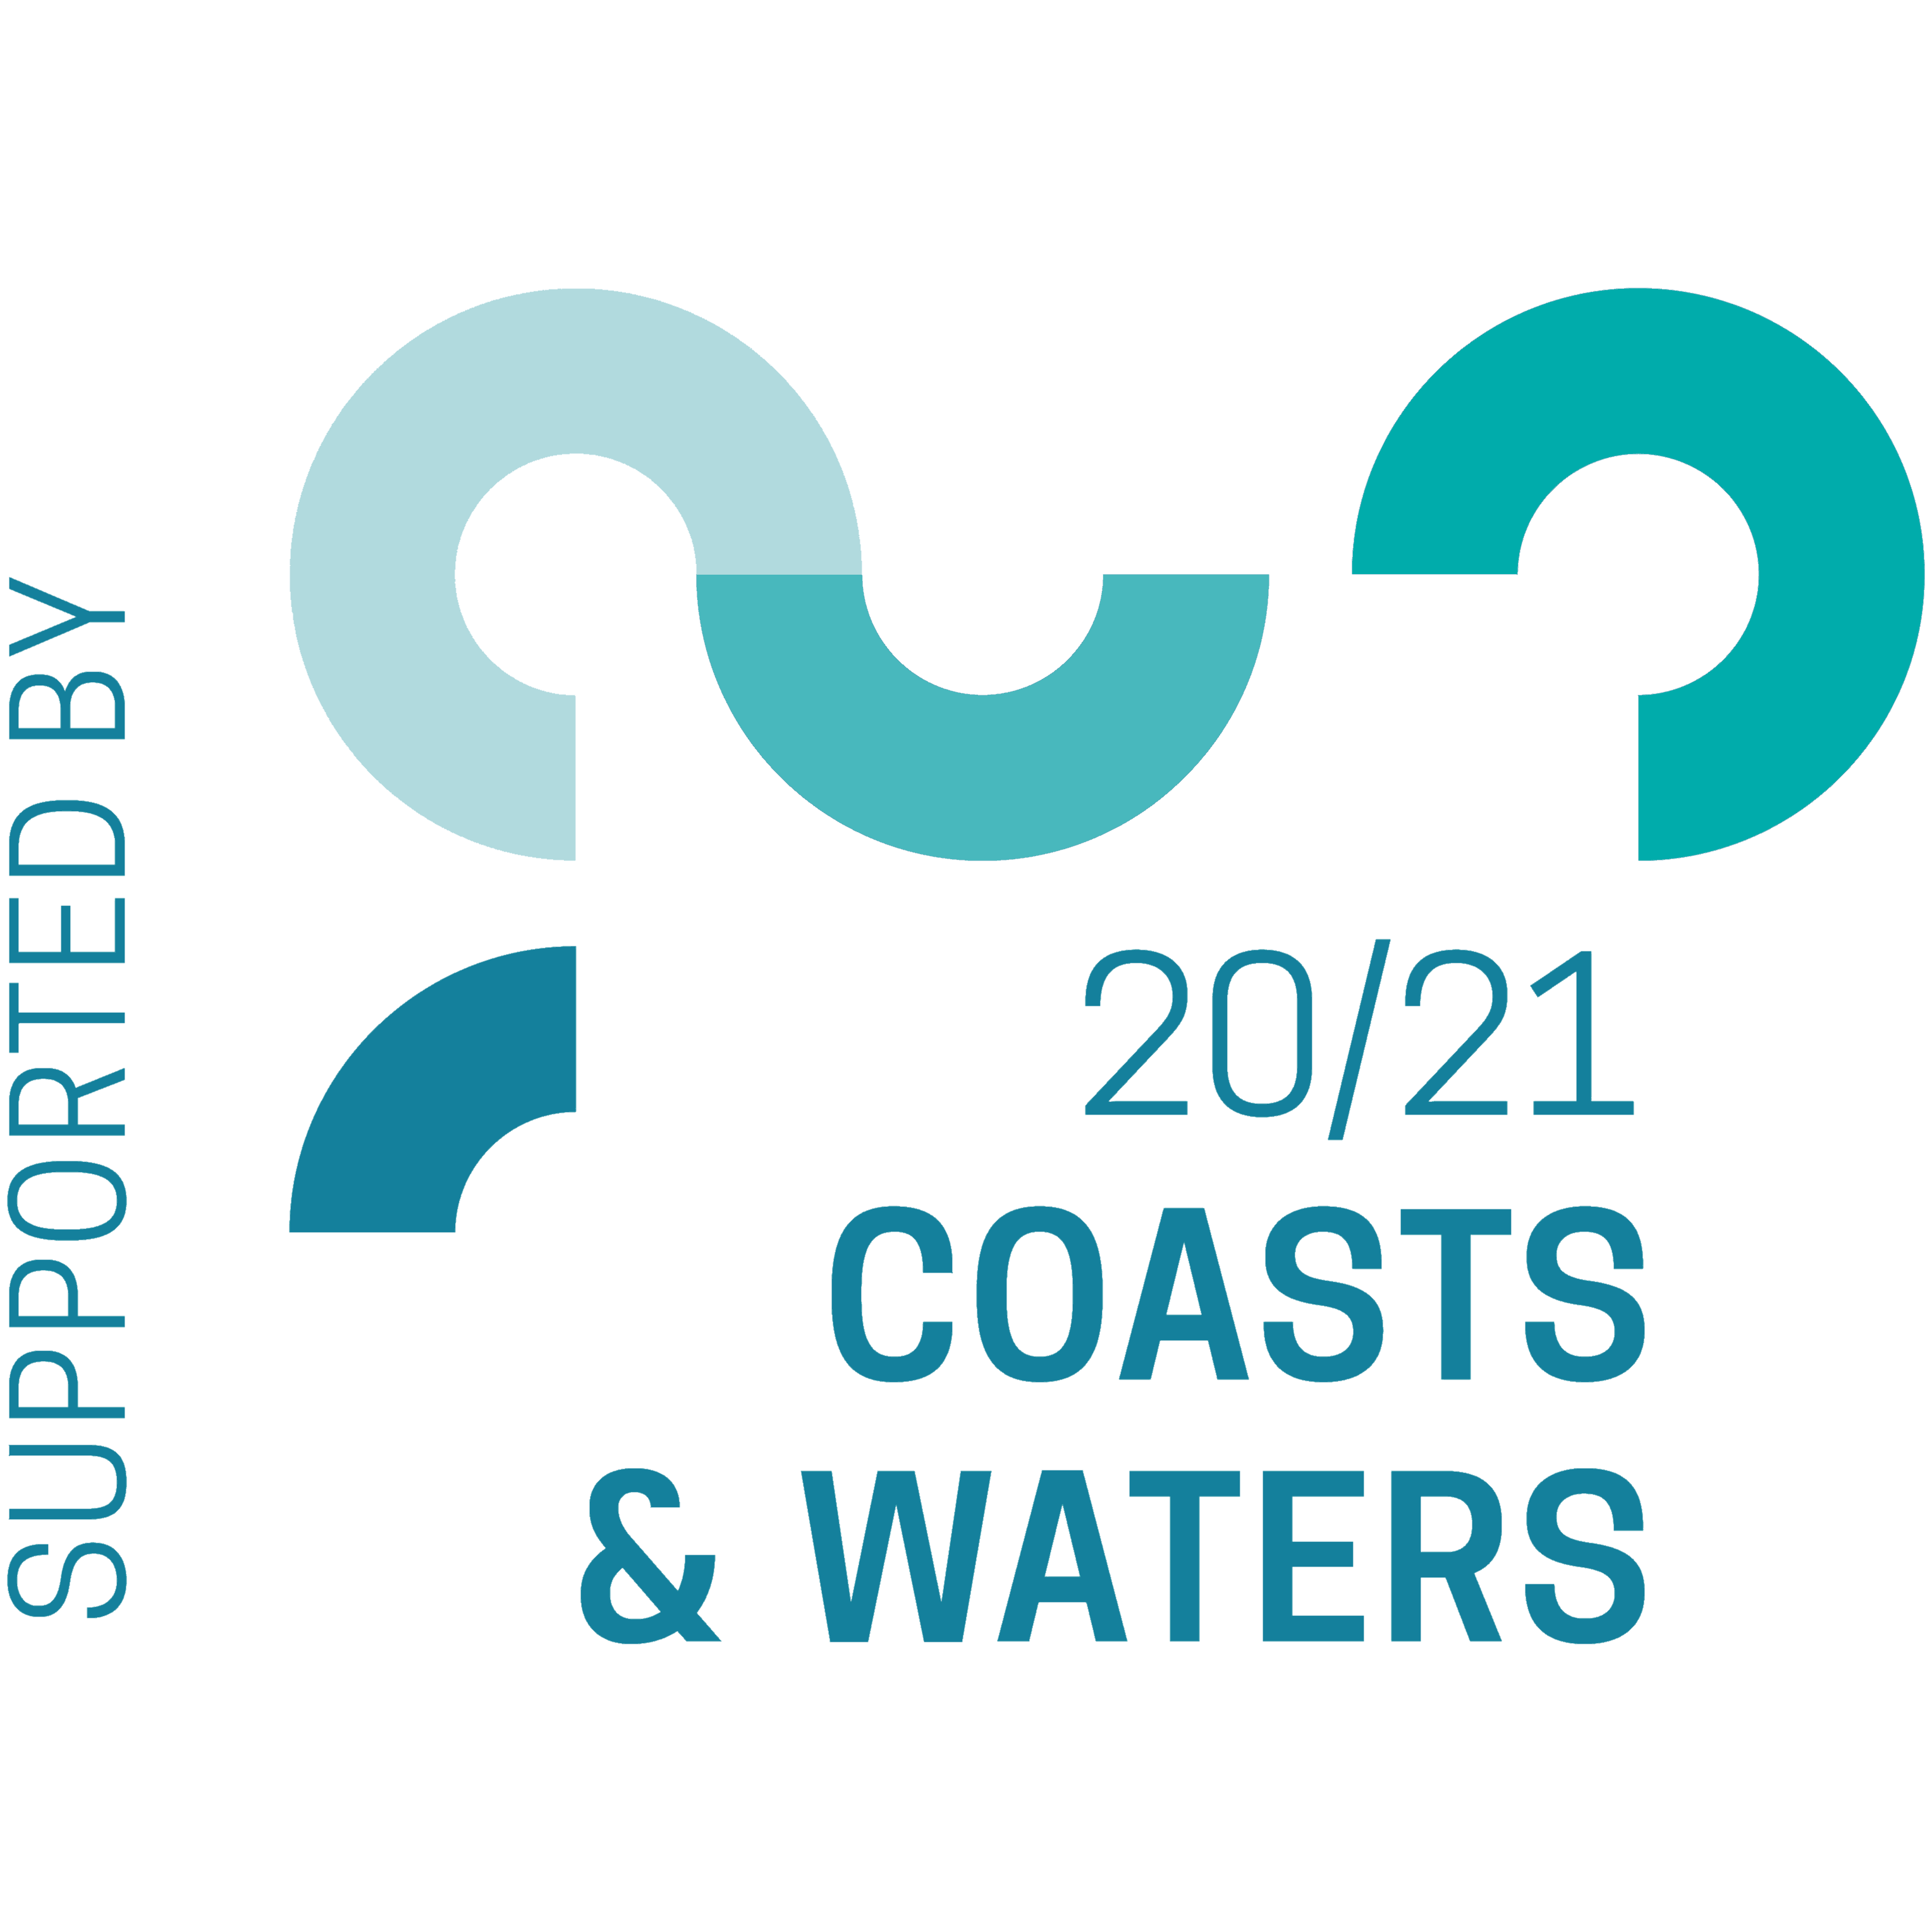 Year of Coasts & Waters - 20/21